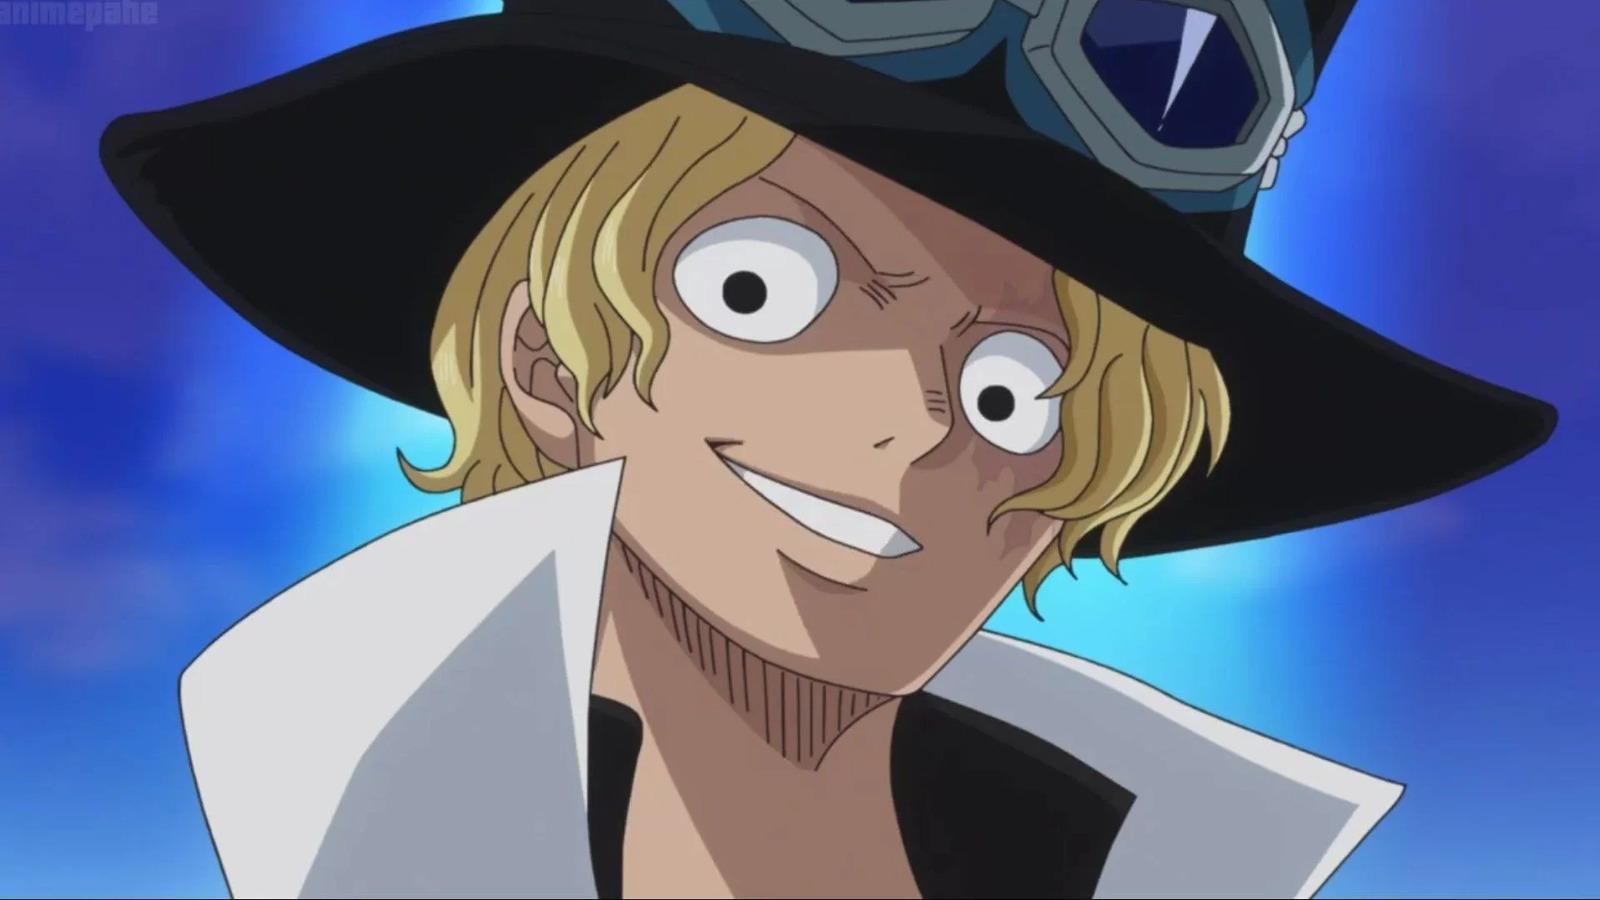 An image of Sabo from One Piece